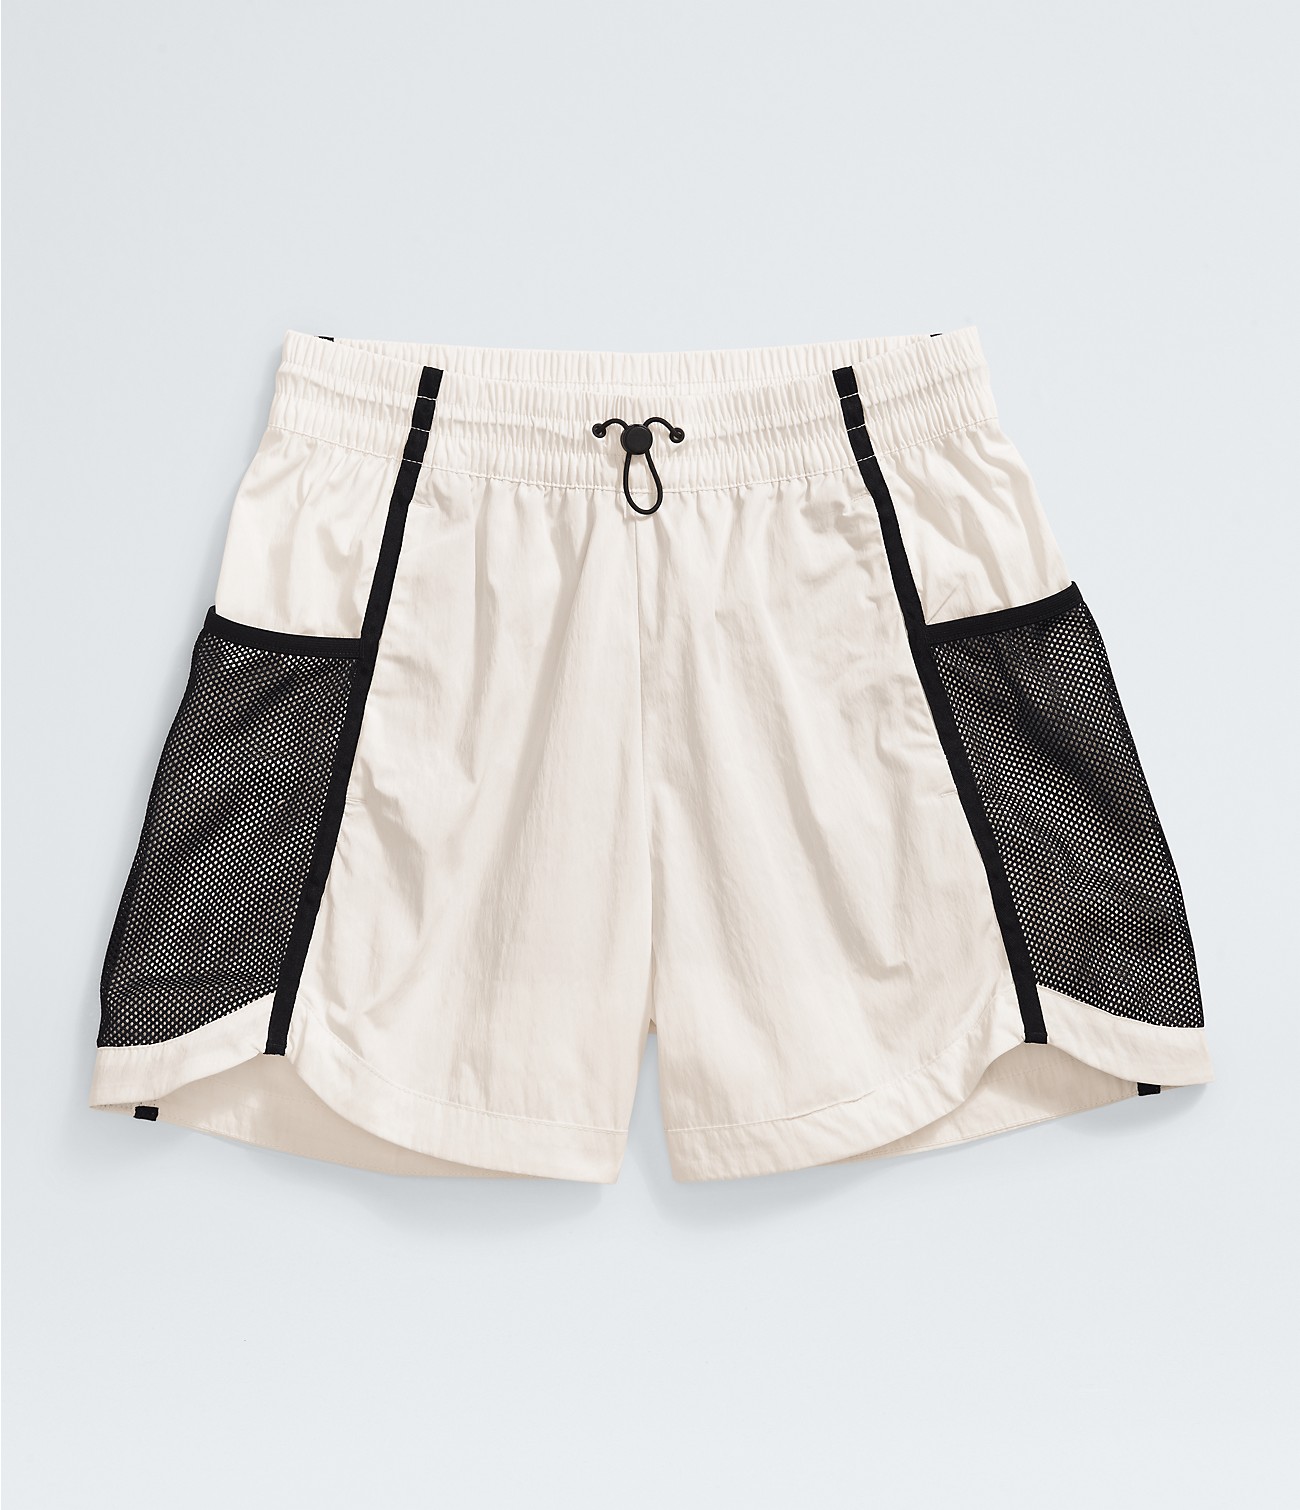 Women’s 2000 Mountain Light Wind Shorts | The North Face